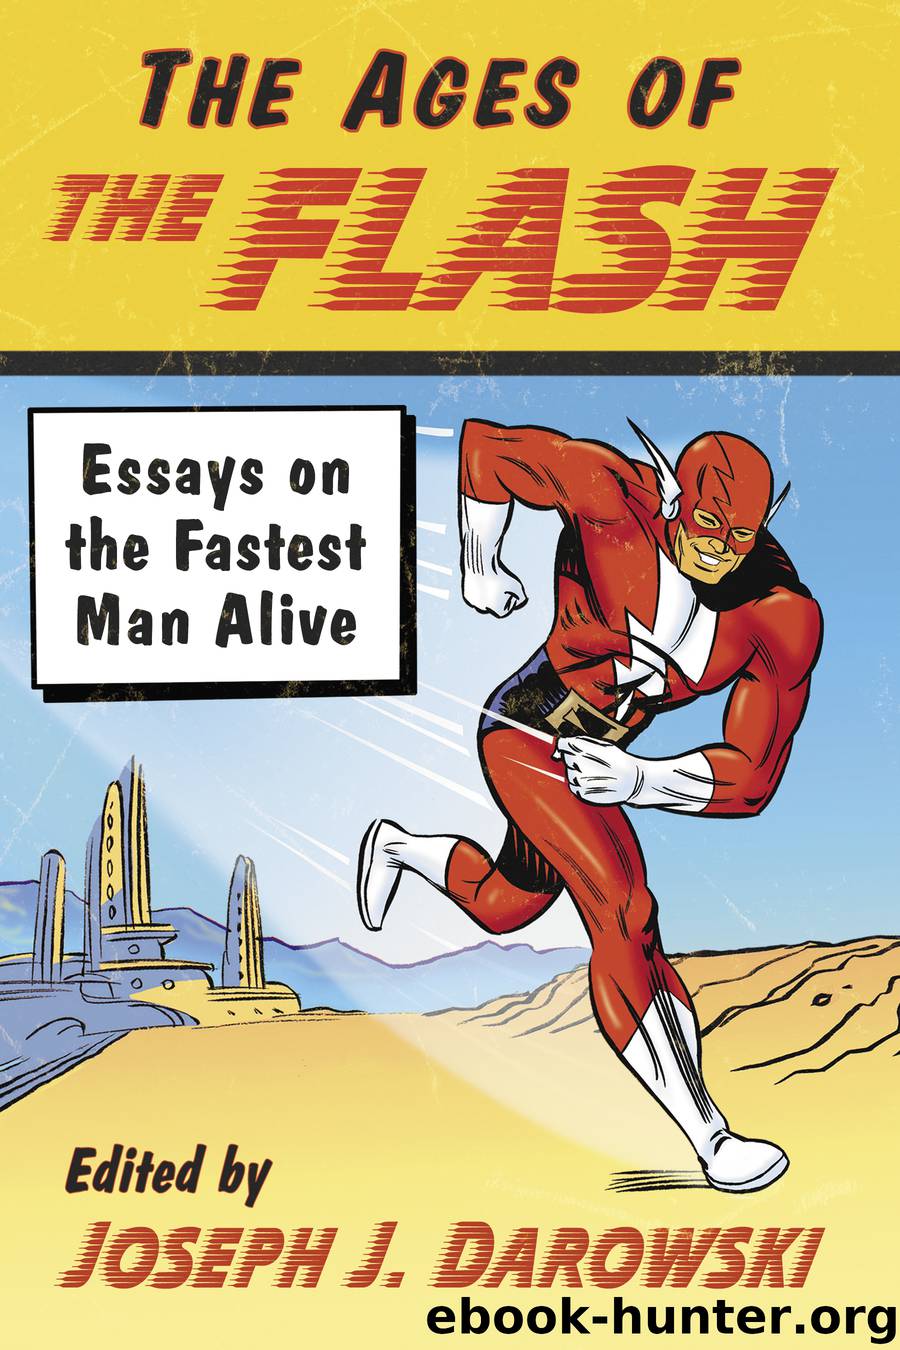 The Ages of the Flash by Joseph J. Darowski